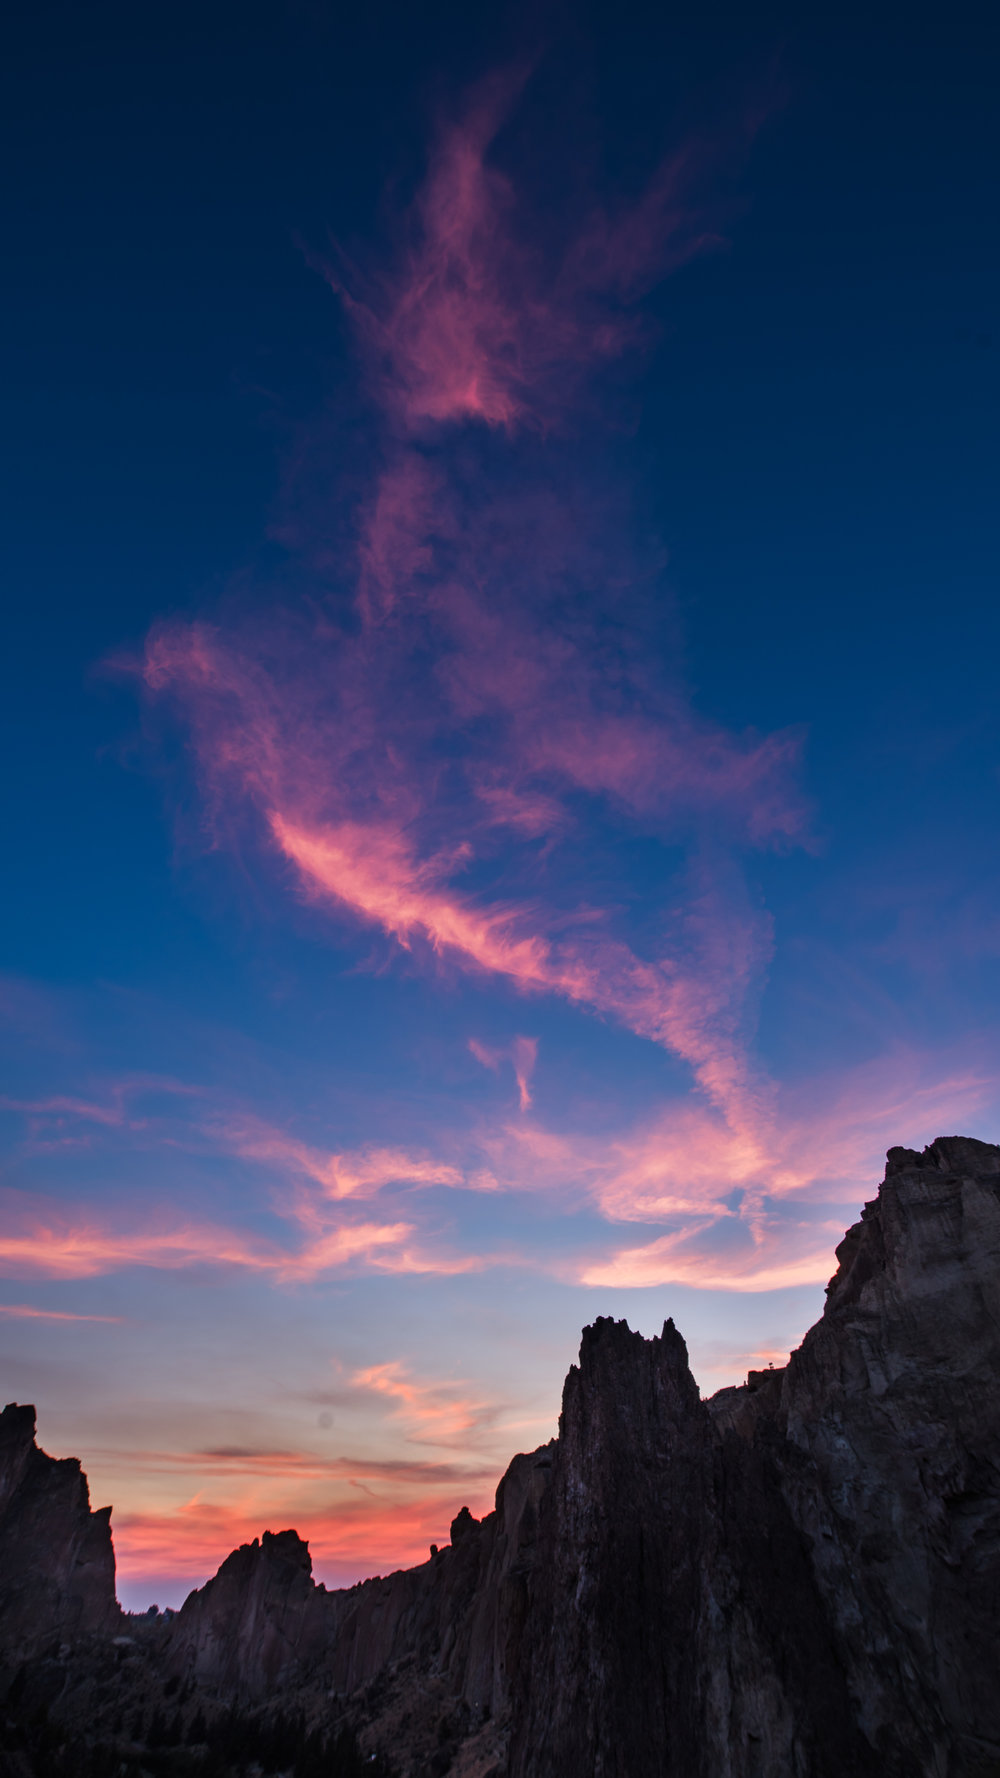 Sunset at Smith Rock State Park